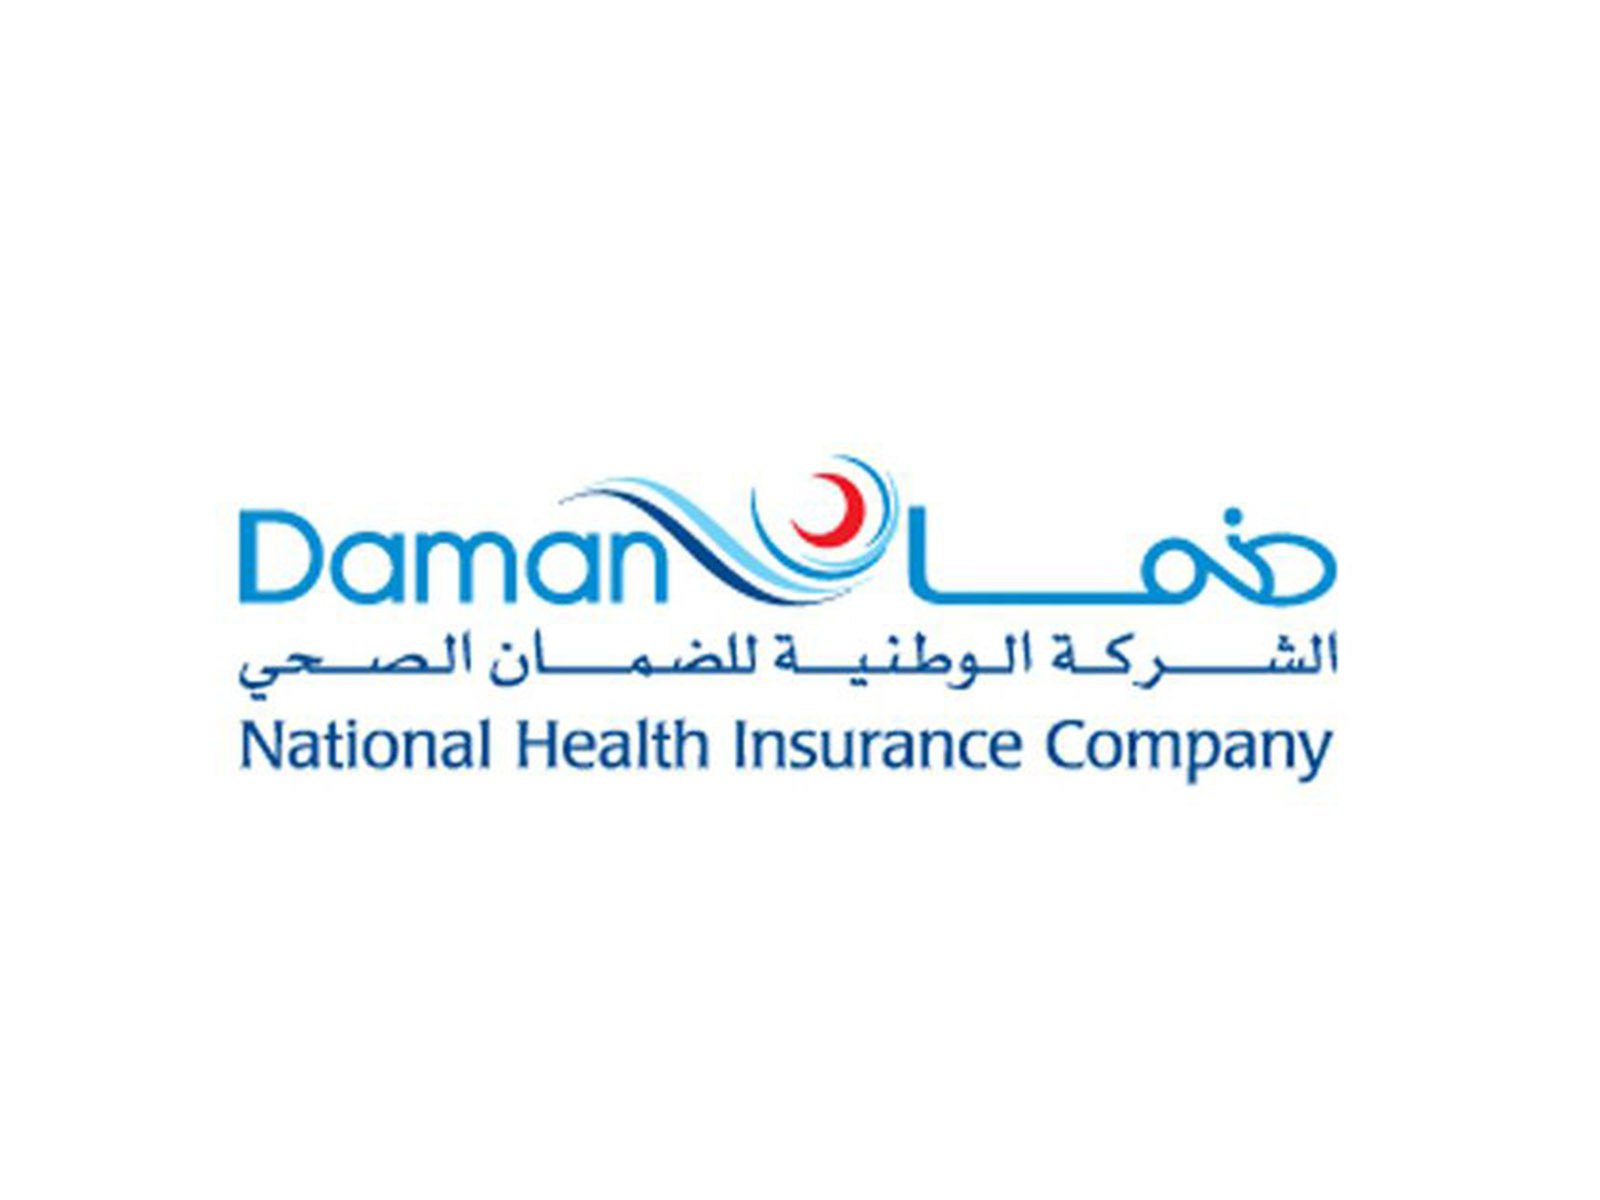 Daman Employees Servicing Millions Of Customers From Home